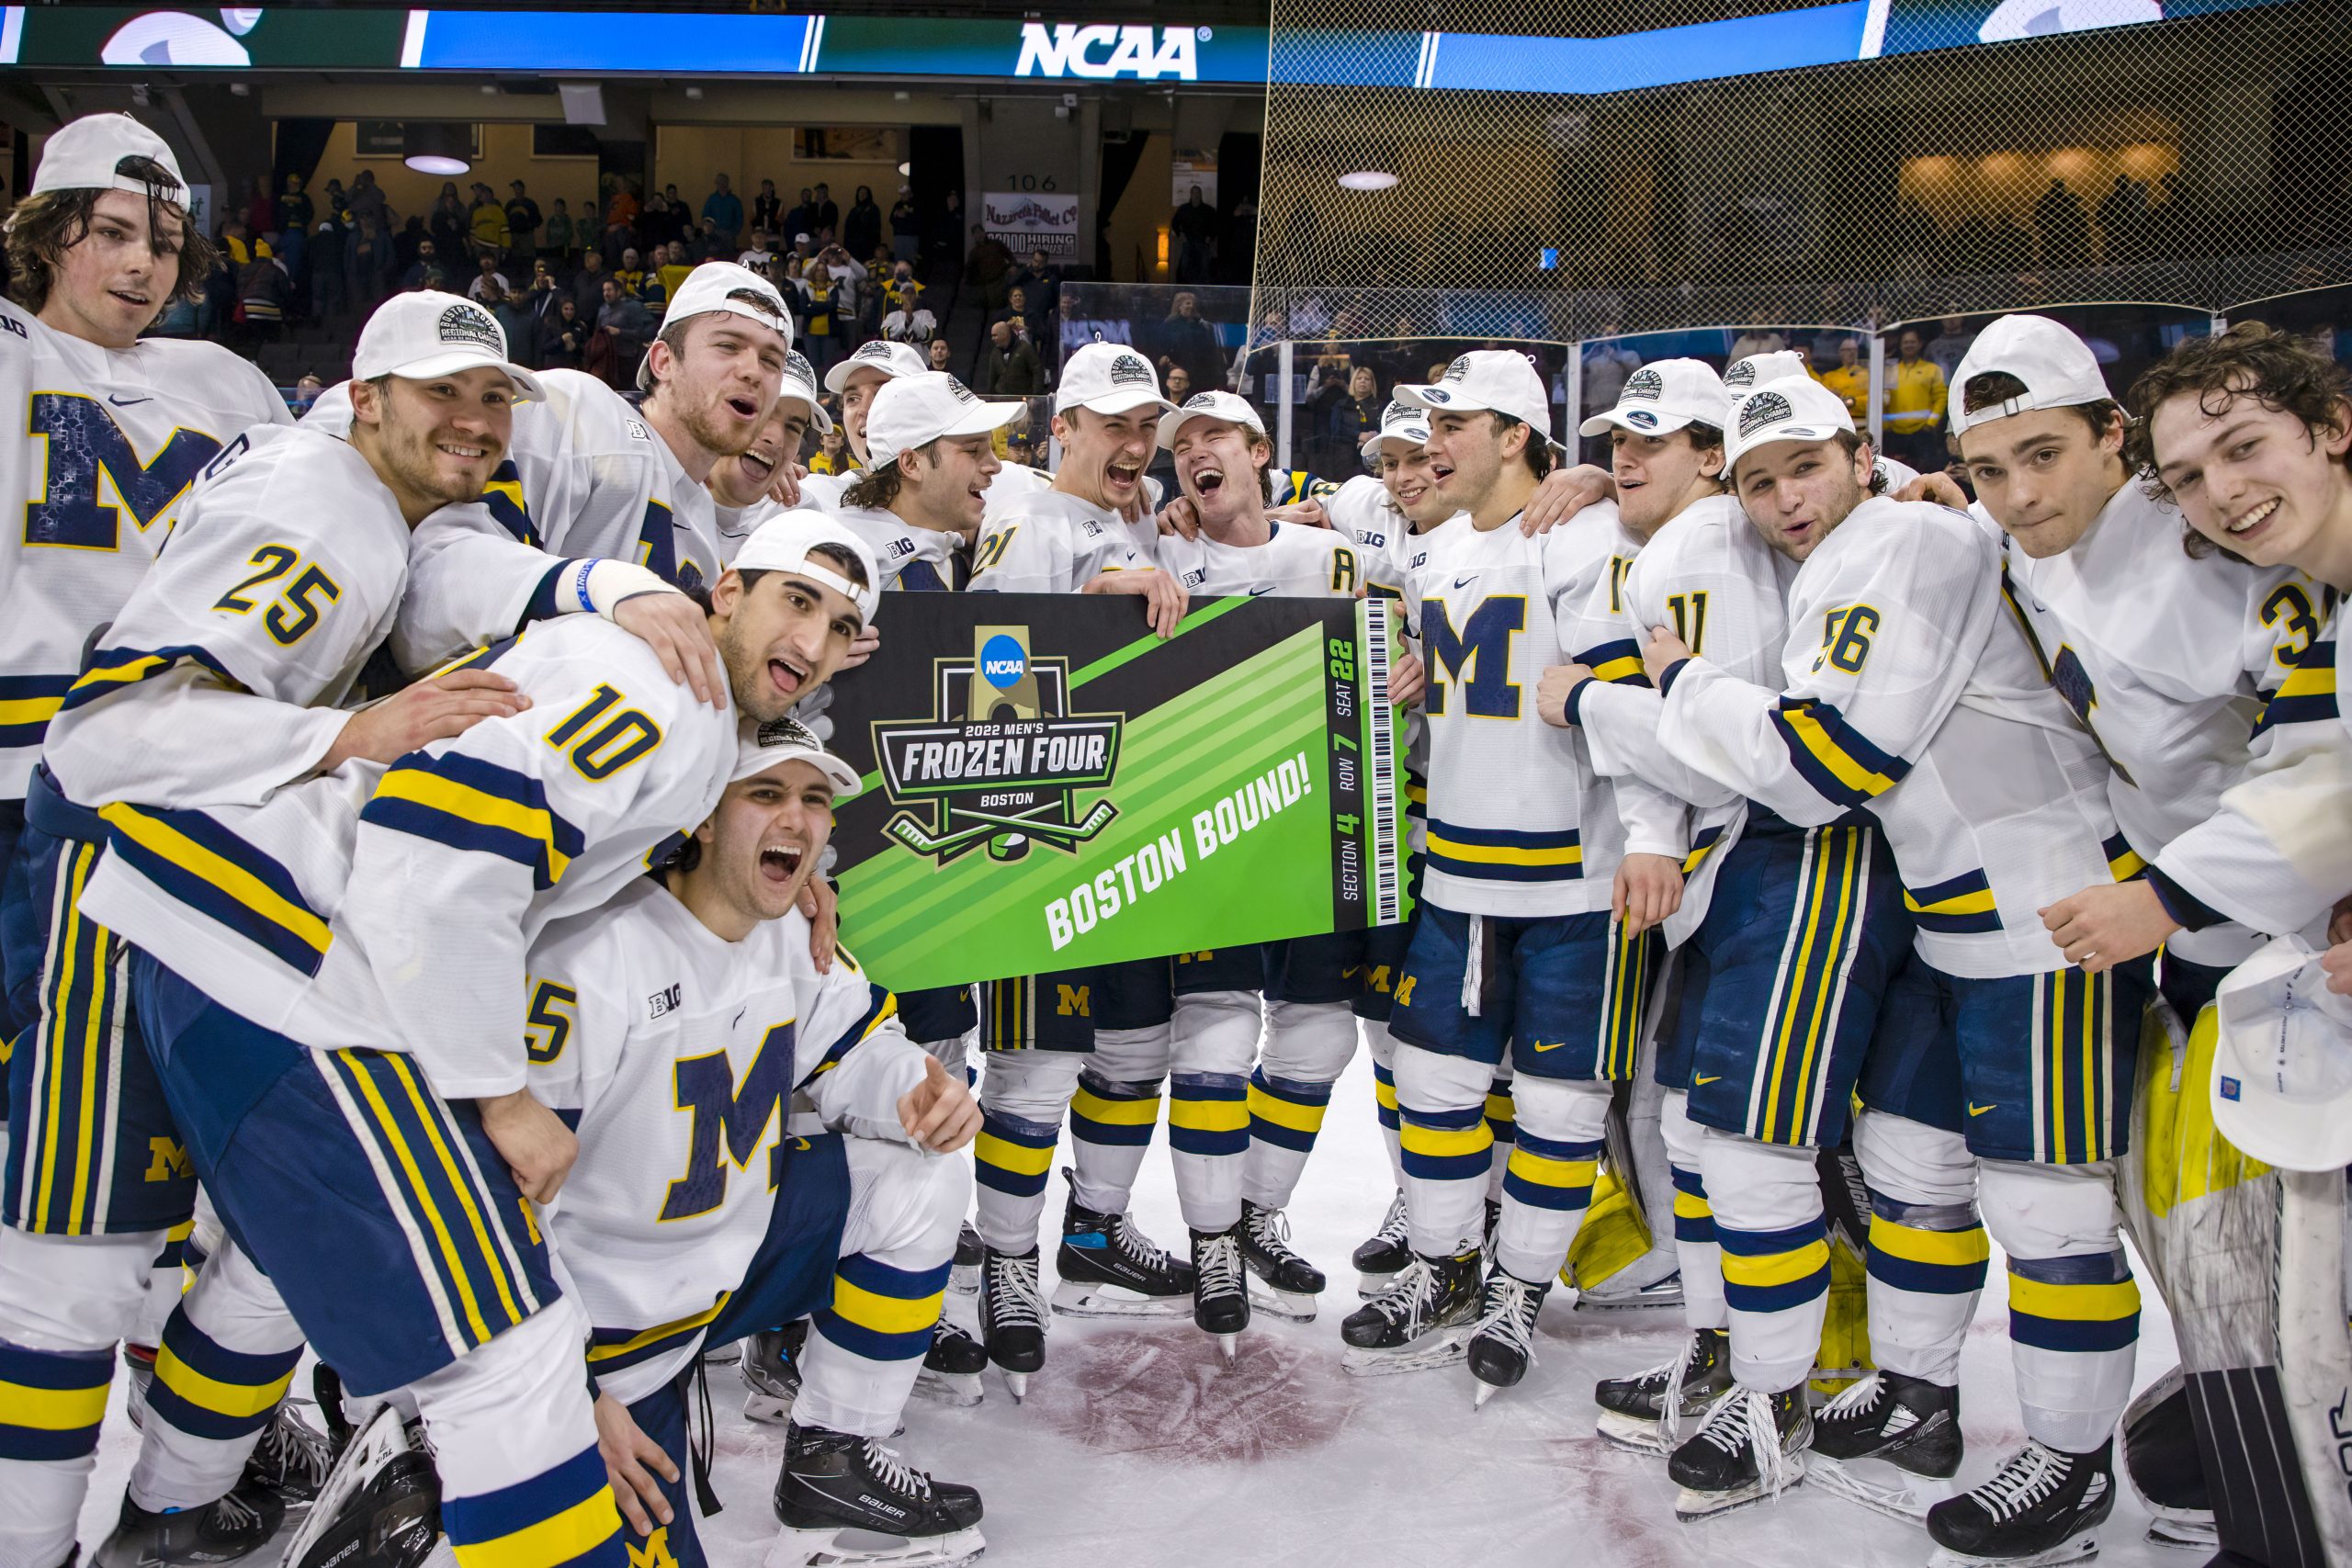 Michigan's NHL-Ready Hockey Team Plays in Frozen Four - The New